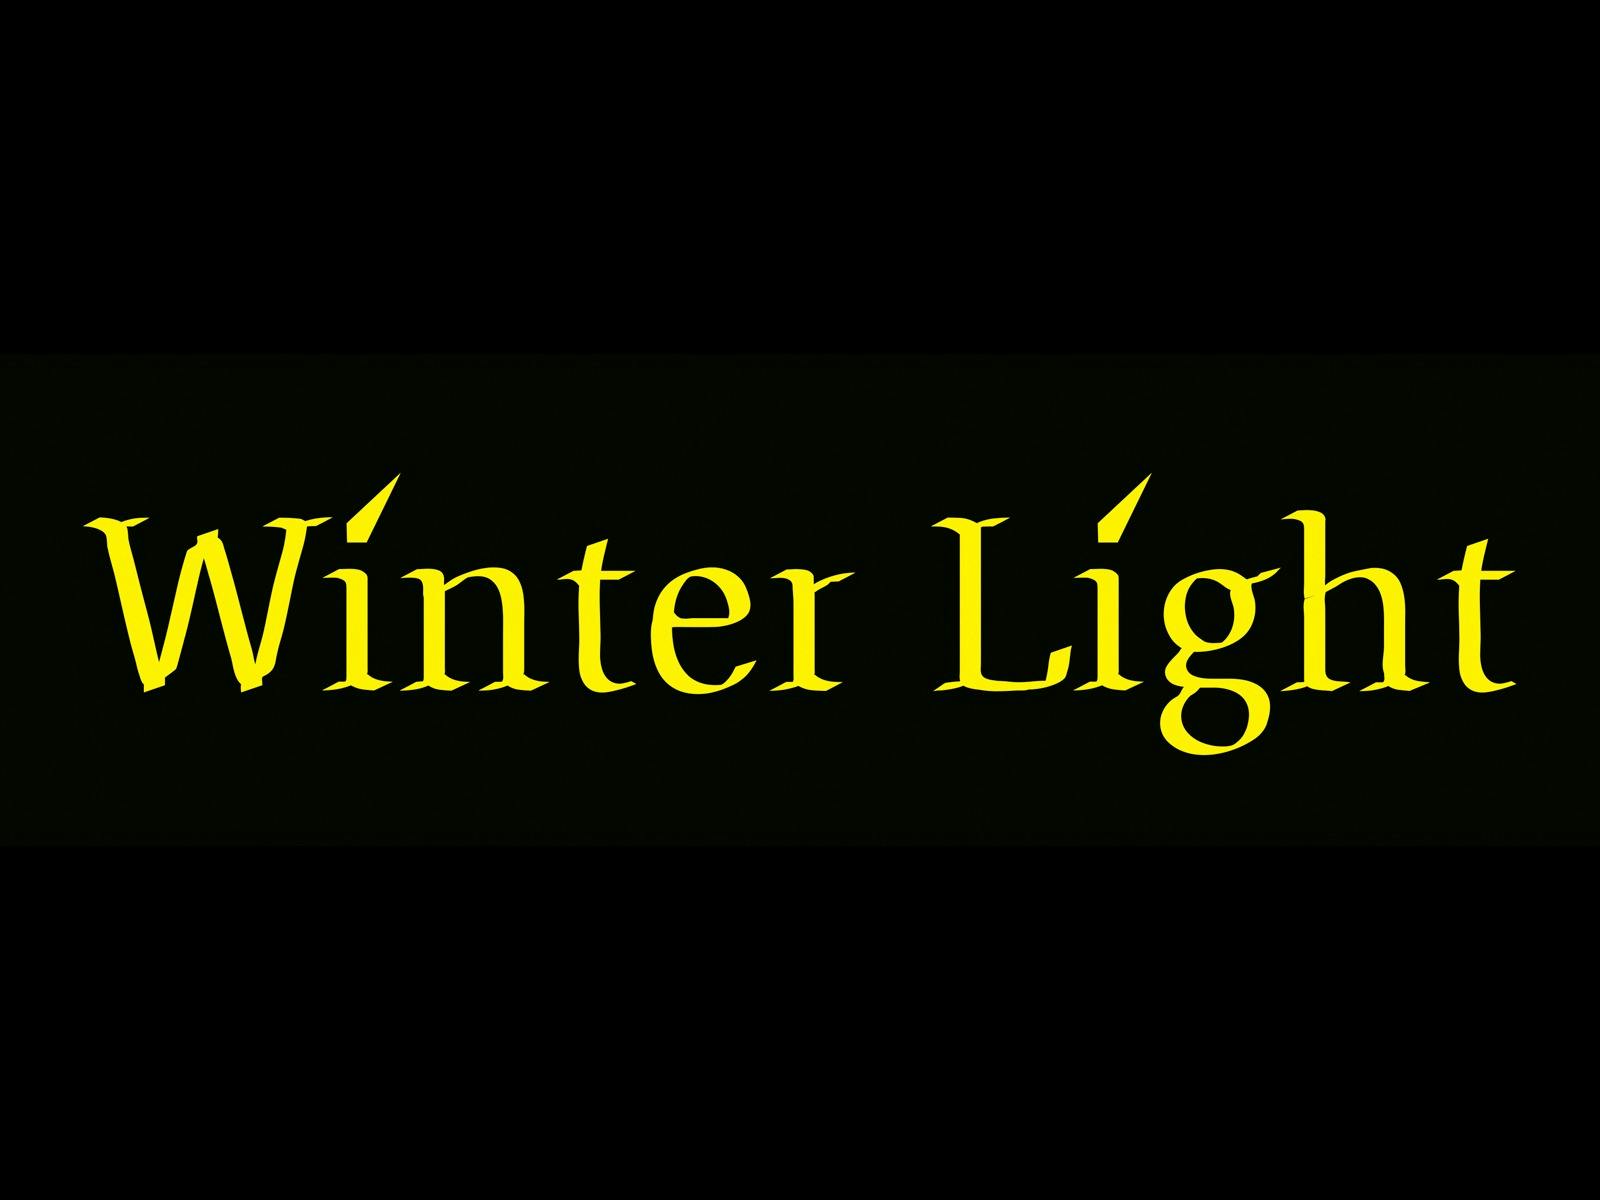 A black background with the words Winter Light sitting on it in yellow.